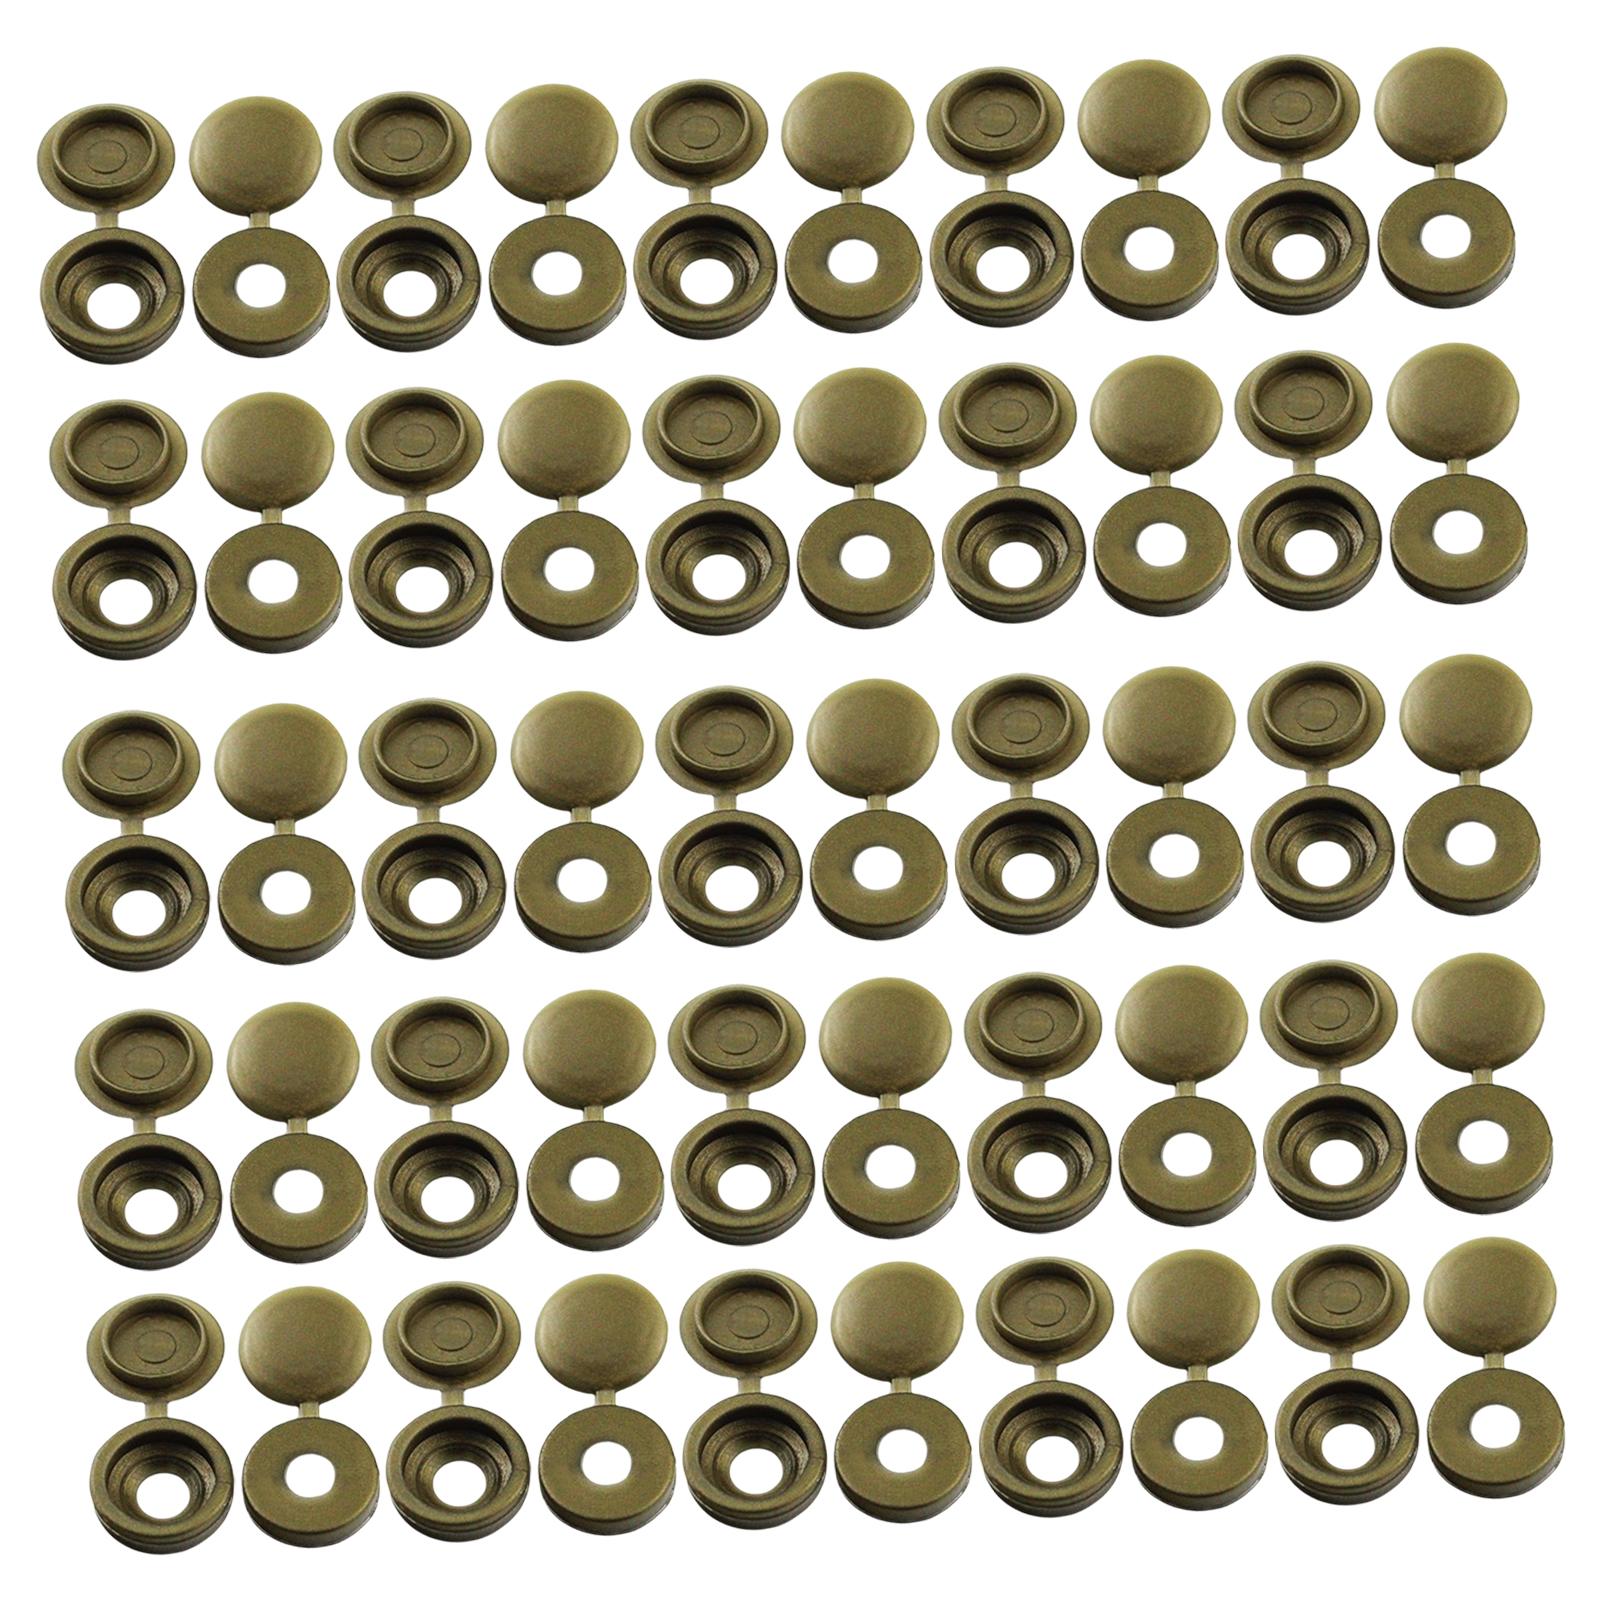 100 Pieces Screw Covers, Practical Screws Caps for Replacement Tools Yard Mocha Gold